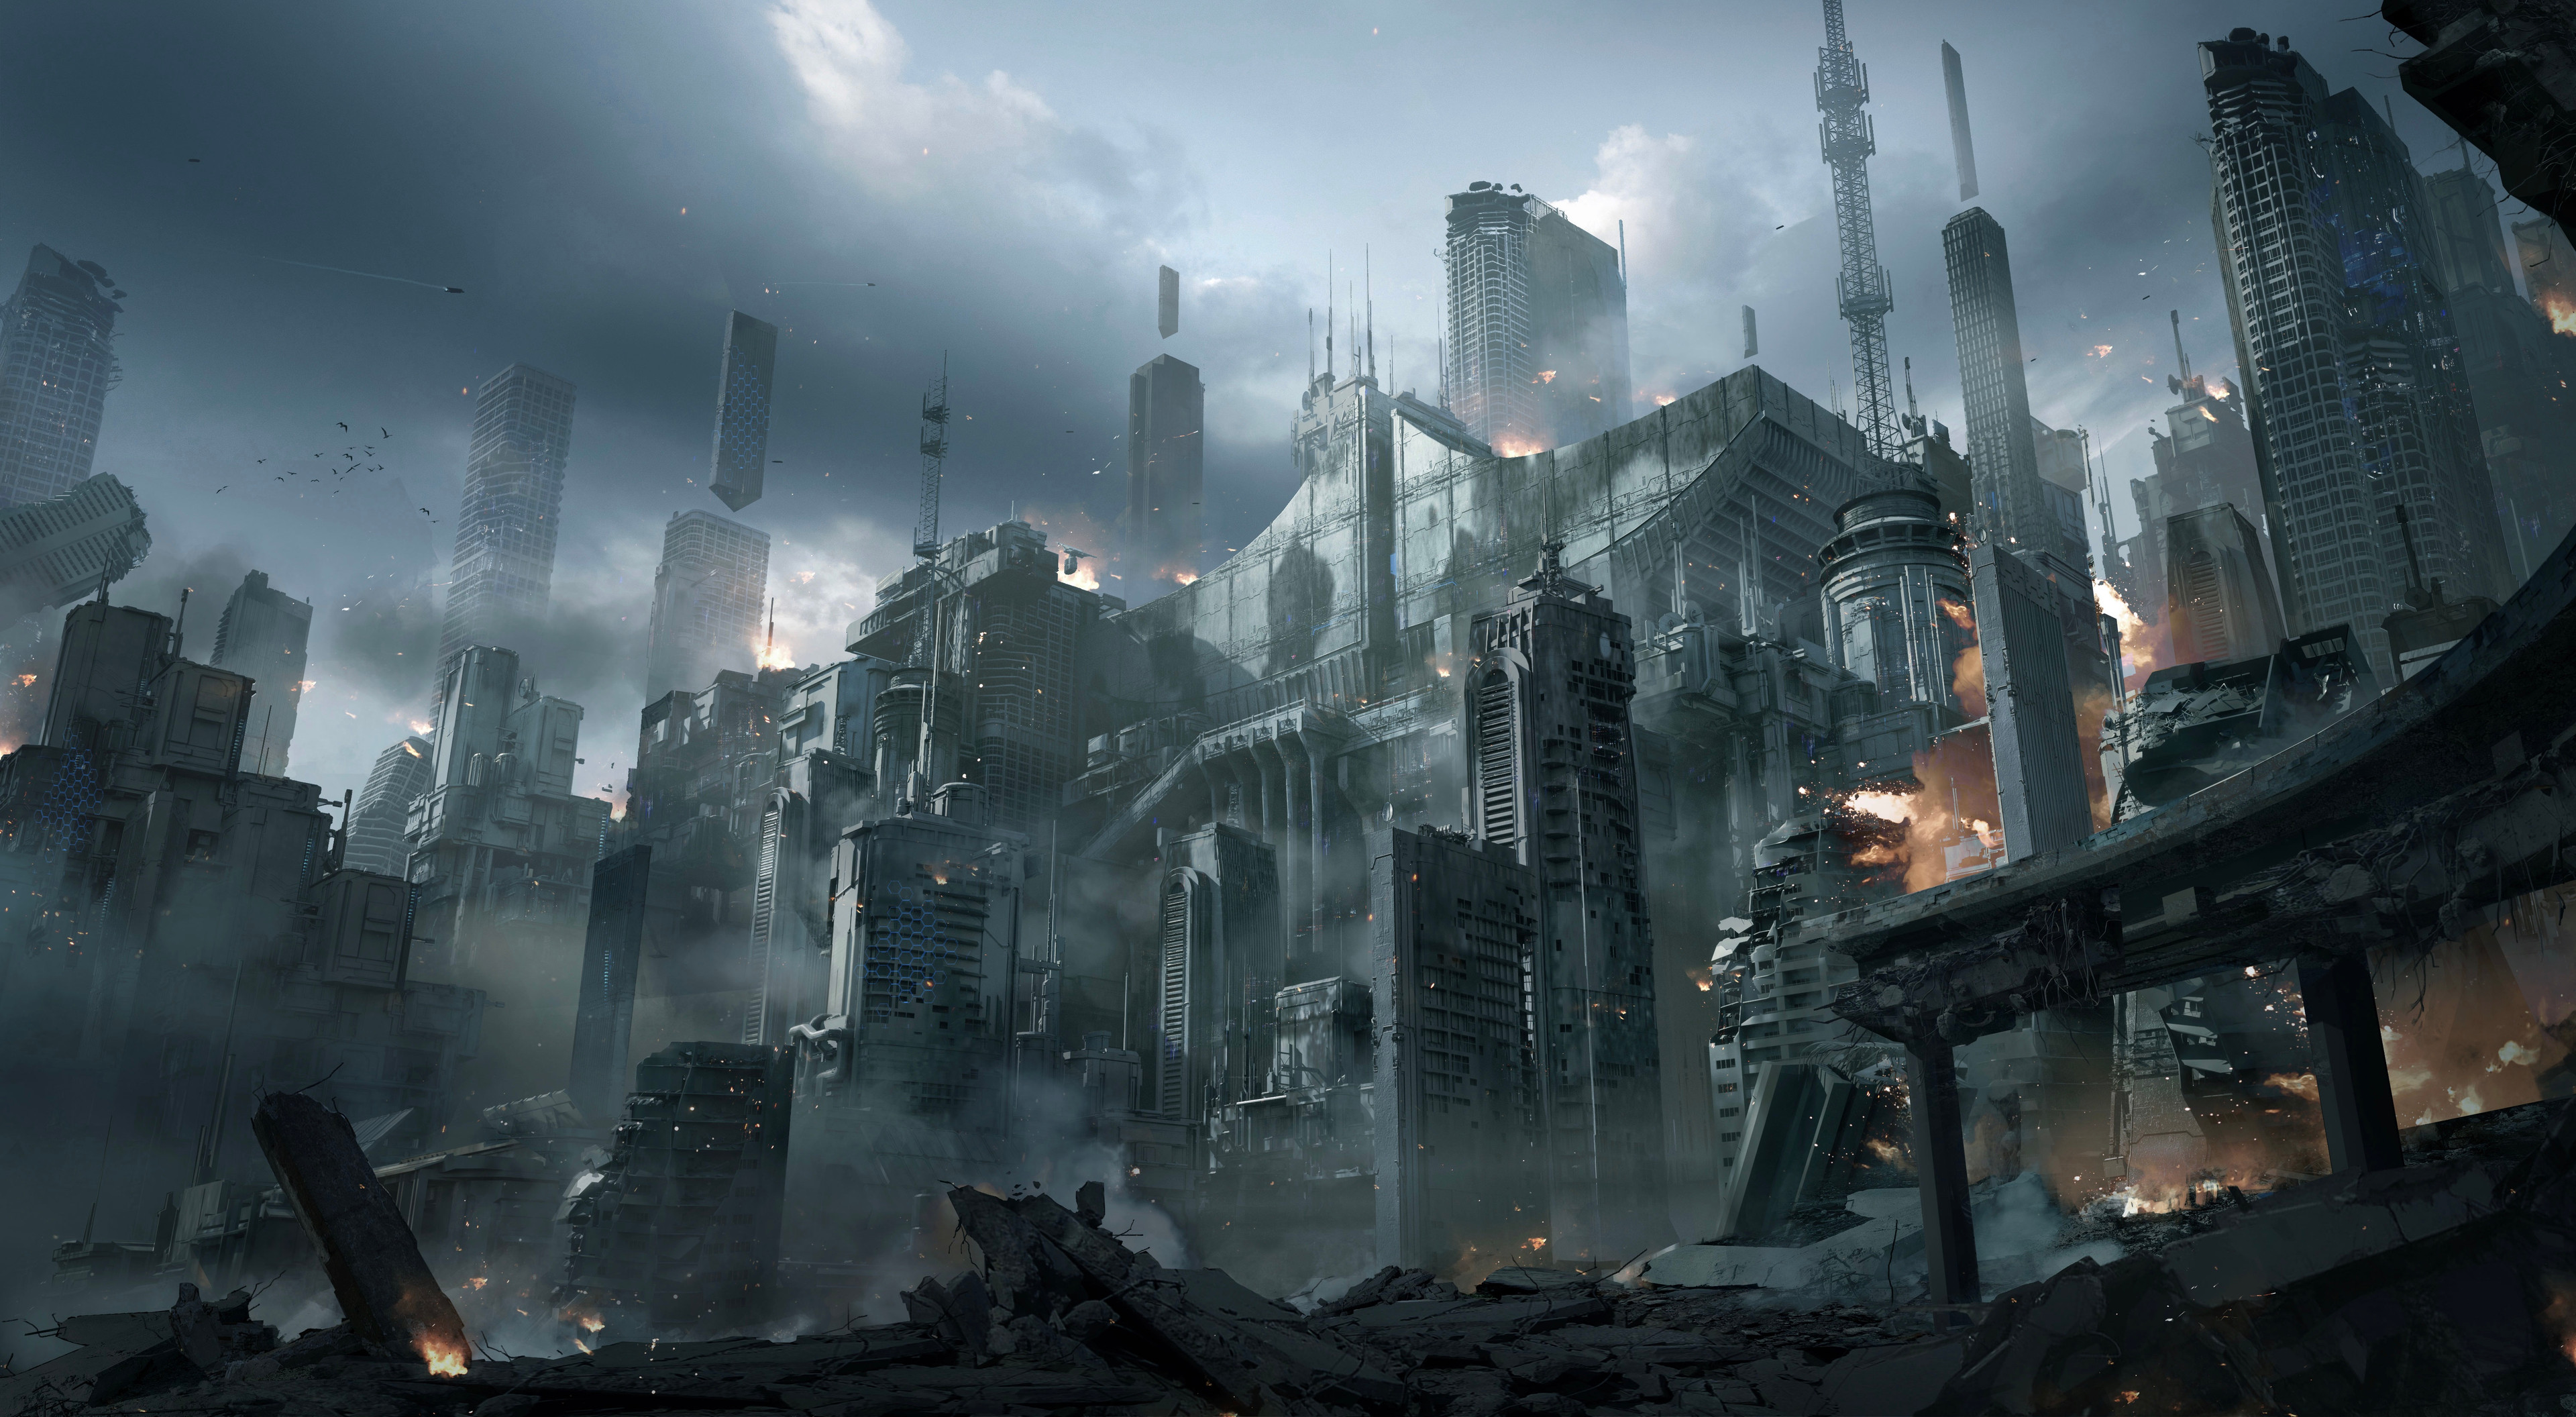 The fortress city after the war by liang liu